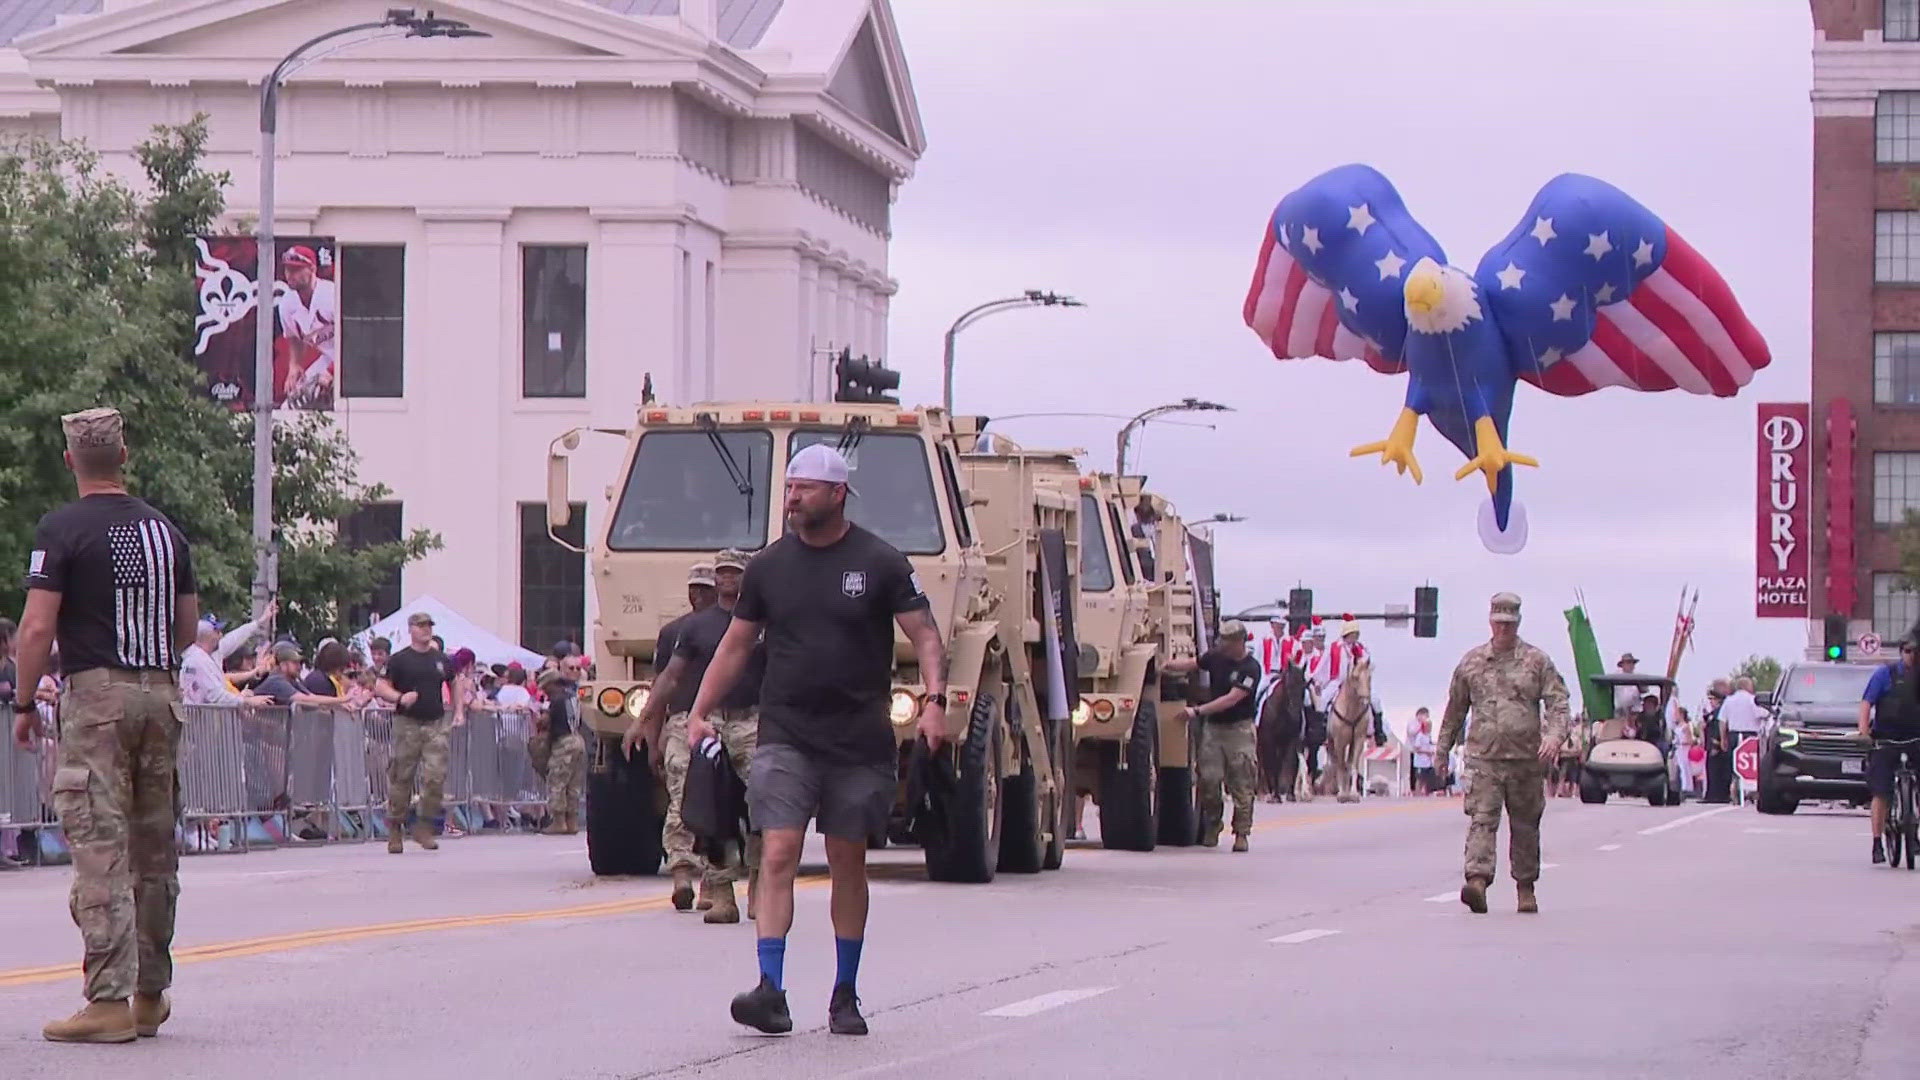 Rain postponed or cancelled some of today's festivities in the St. Louis area. Despite that, Webster Groves and Downtown St. Louis held its 4th of July parades.